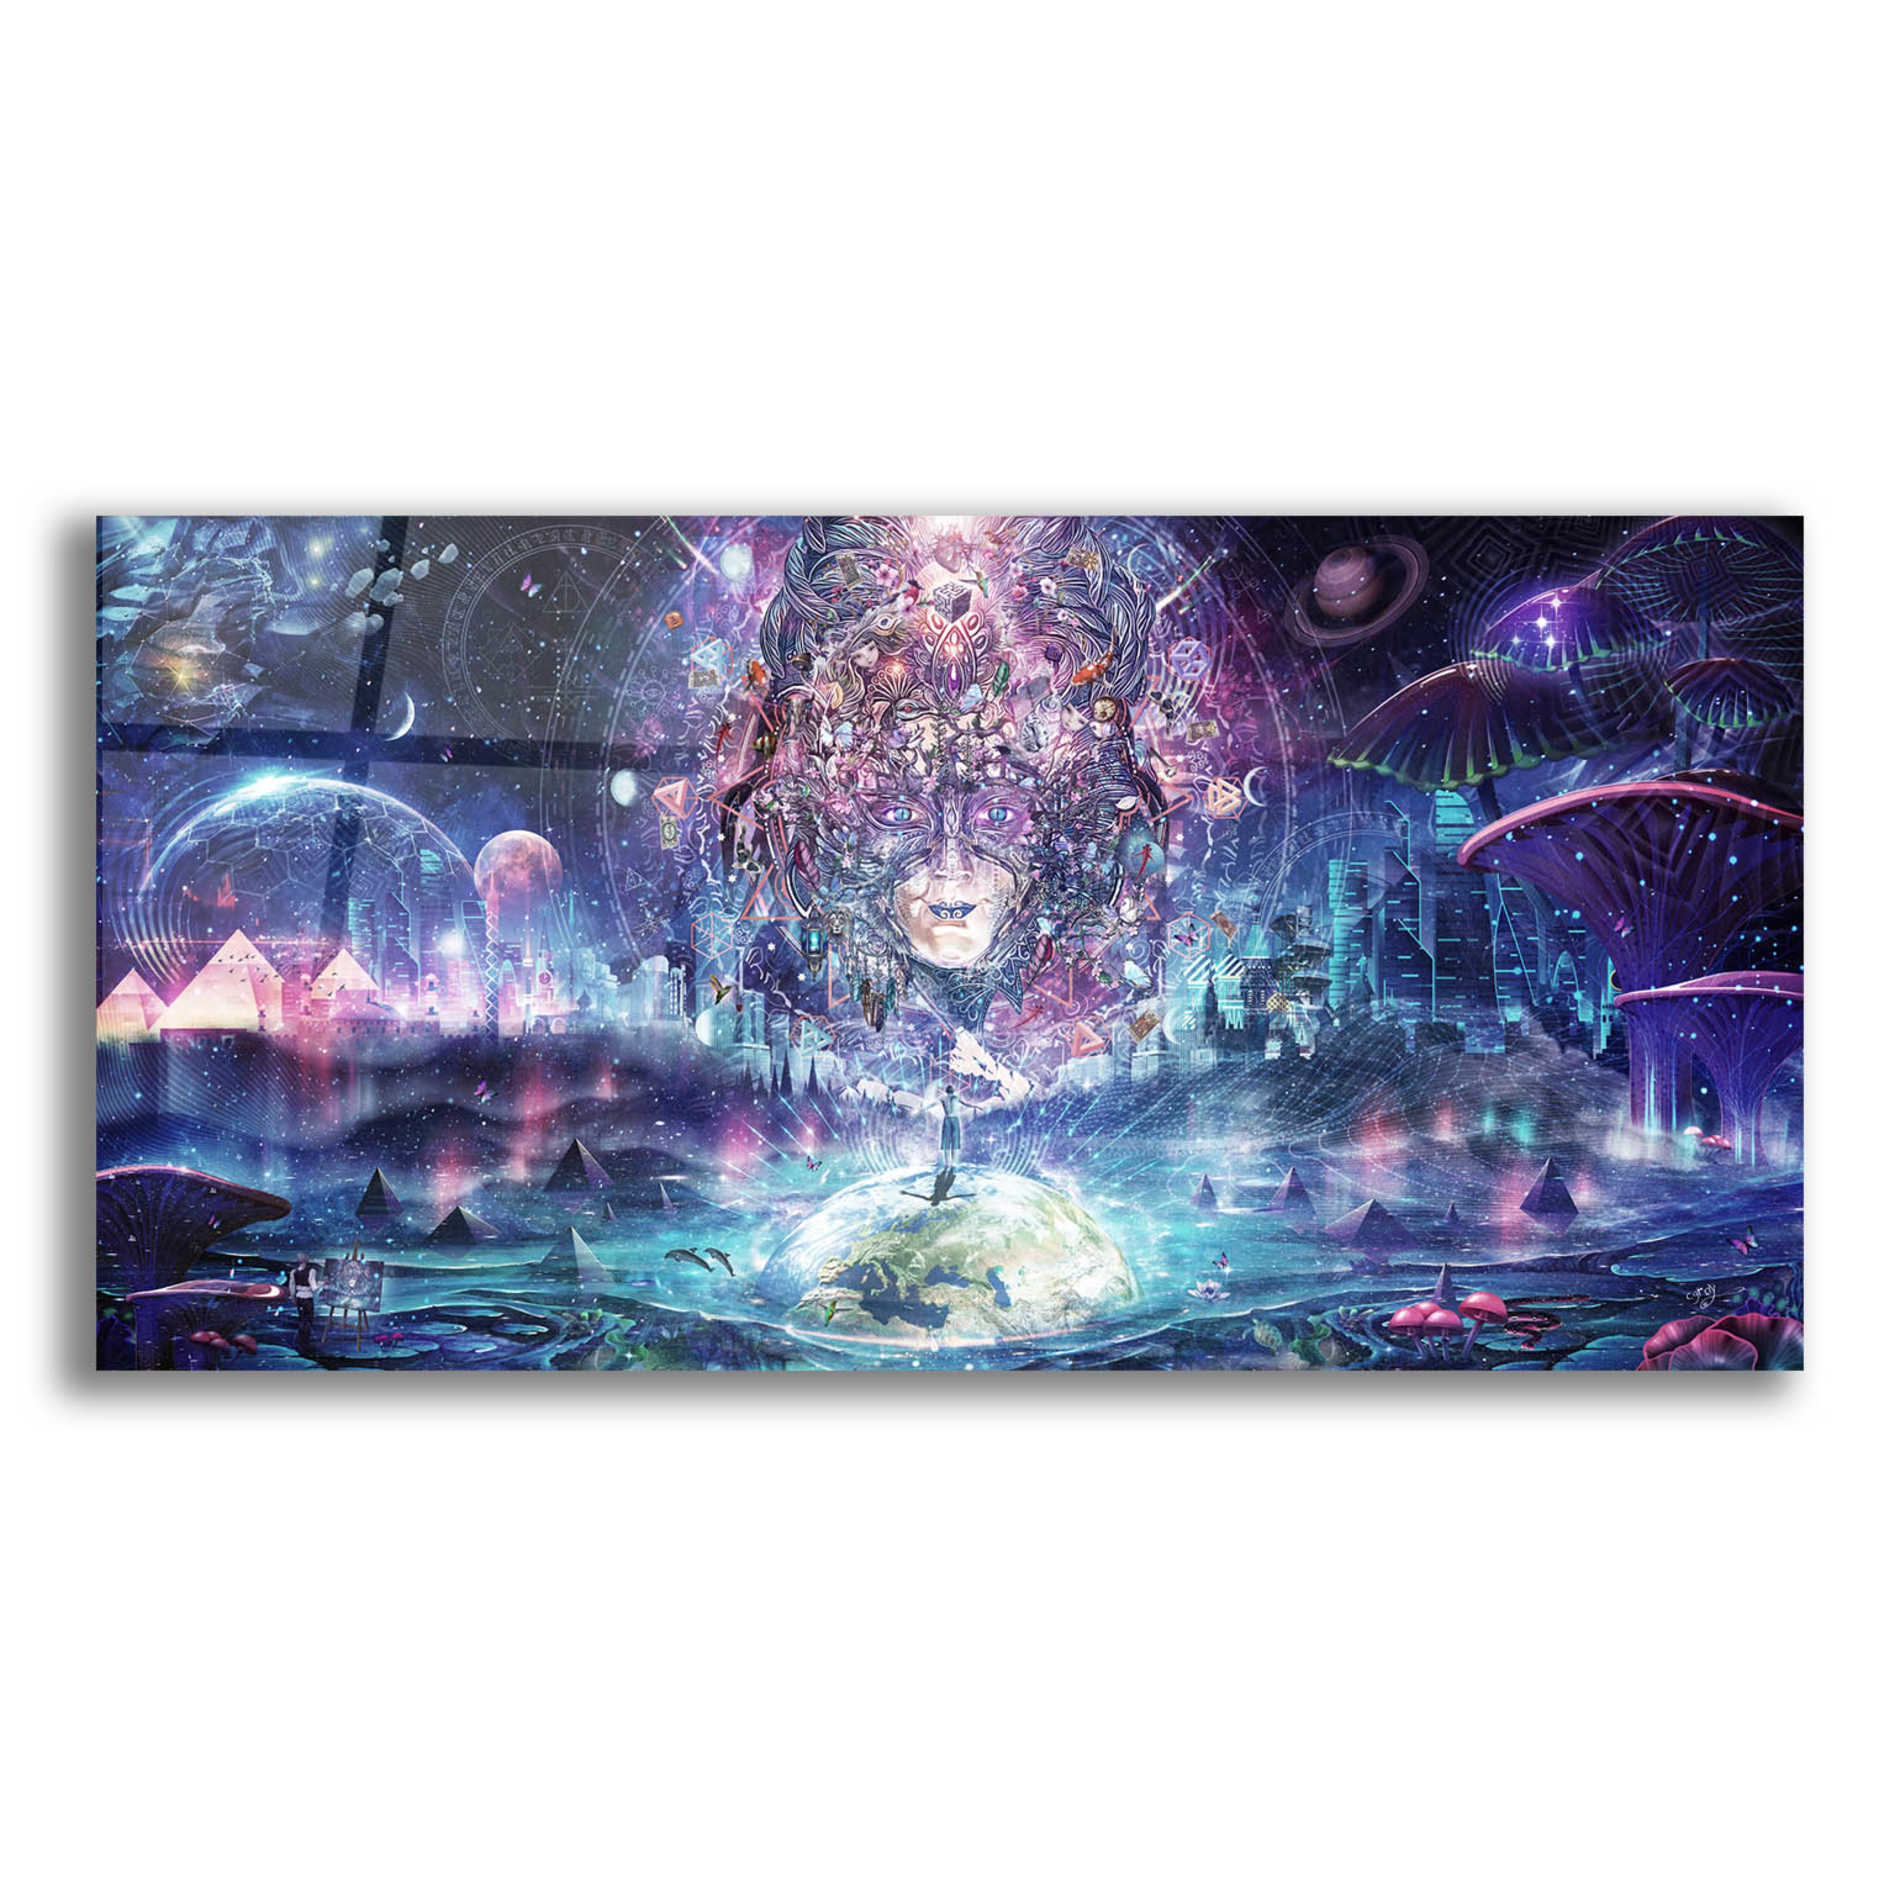 Epic Art 'Quest for the Peak Experience' by Cameron Gray, Acrylic Glass Wall Art,24x12